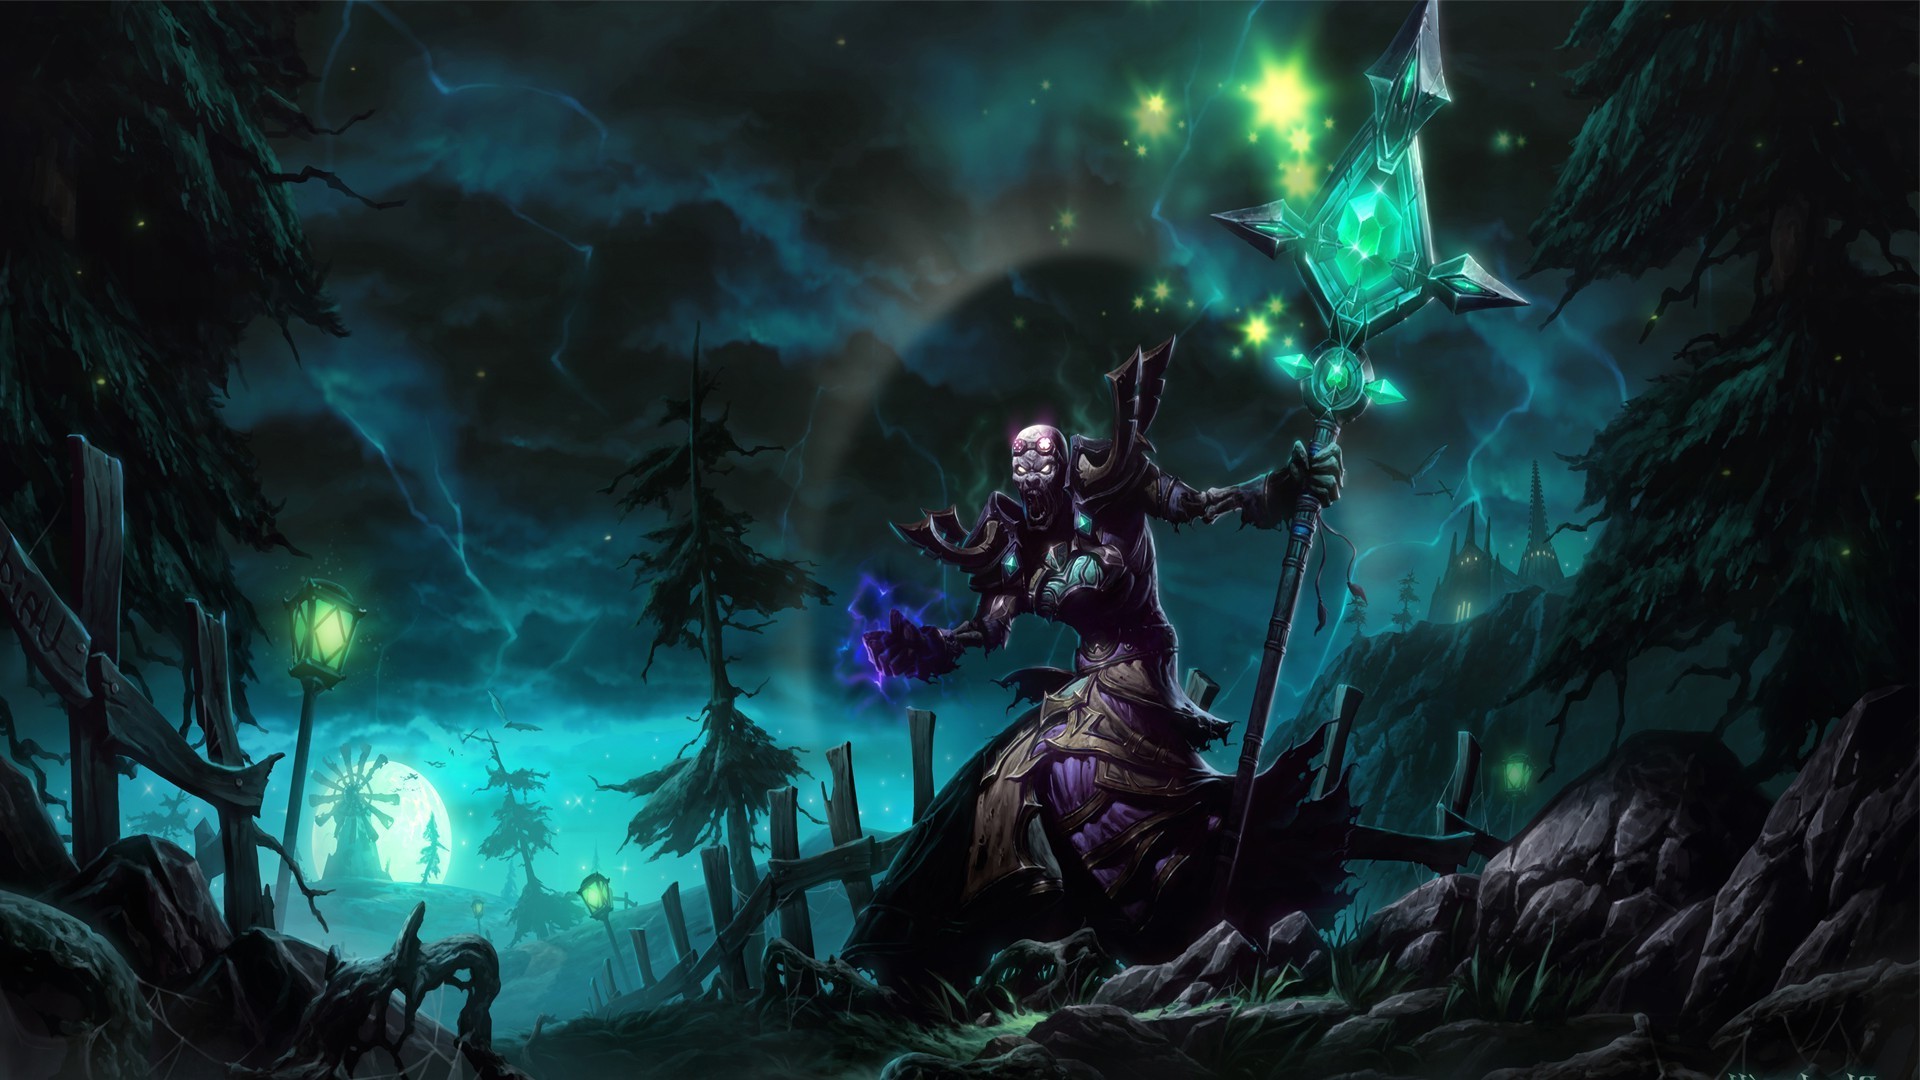 world of warcraft wallpapers hd,action adventure game,pc game,darkness,cg artwork,adventure game